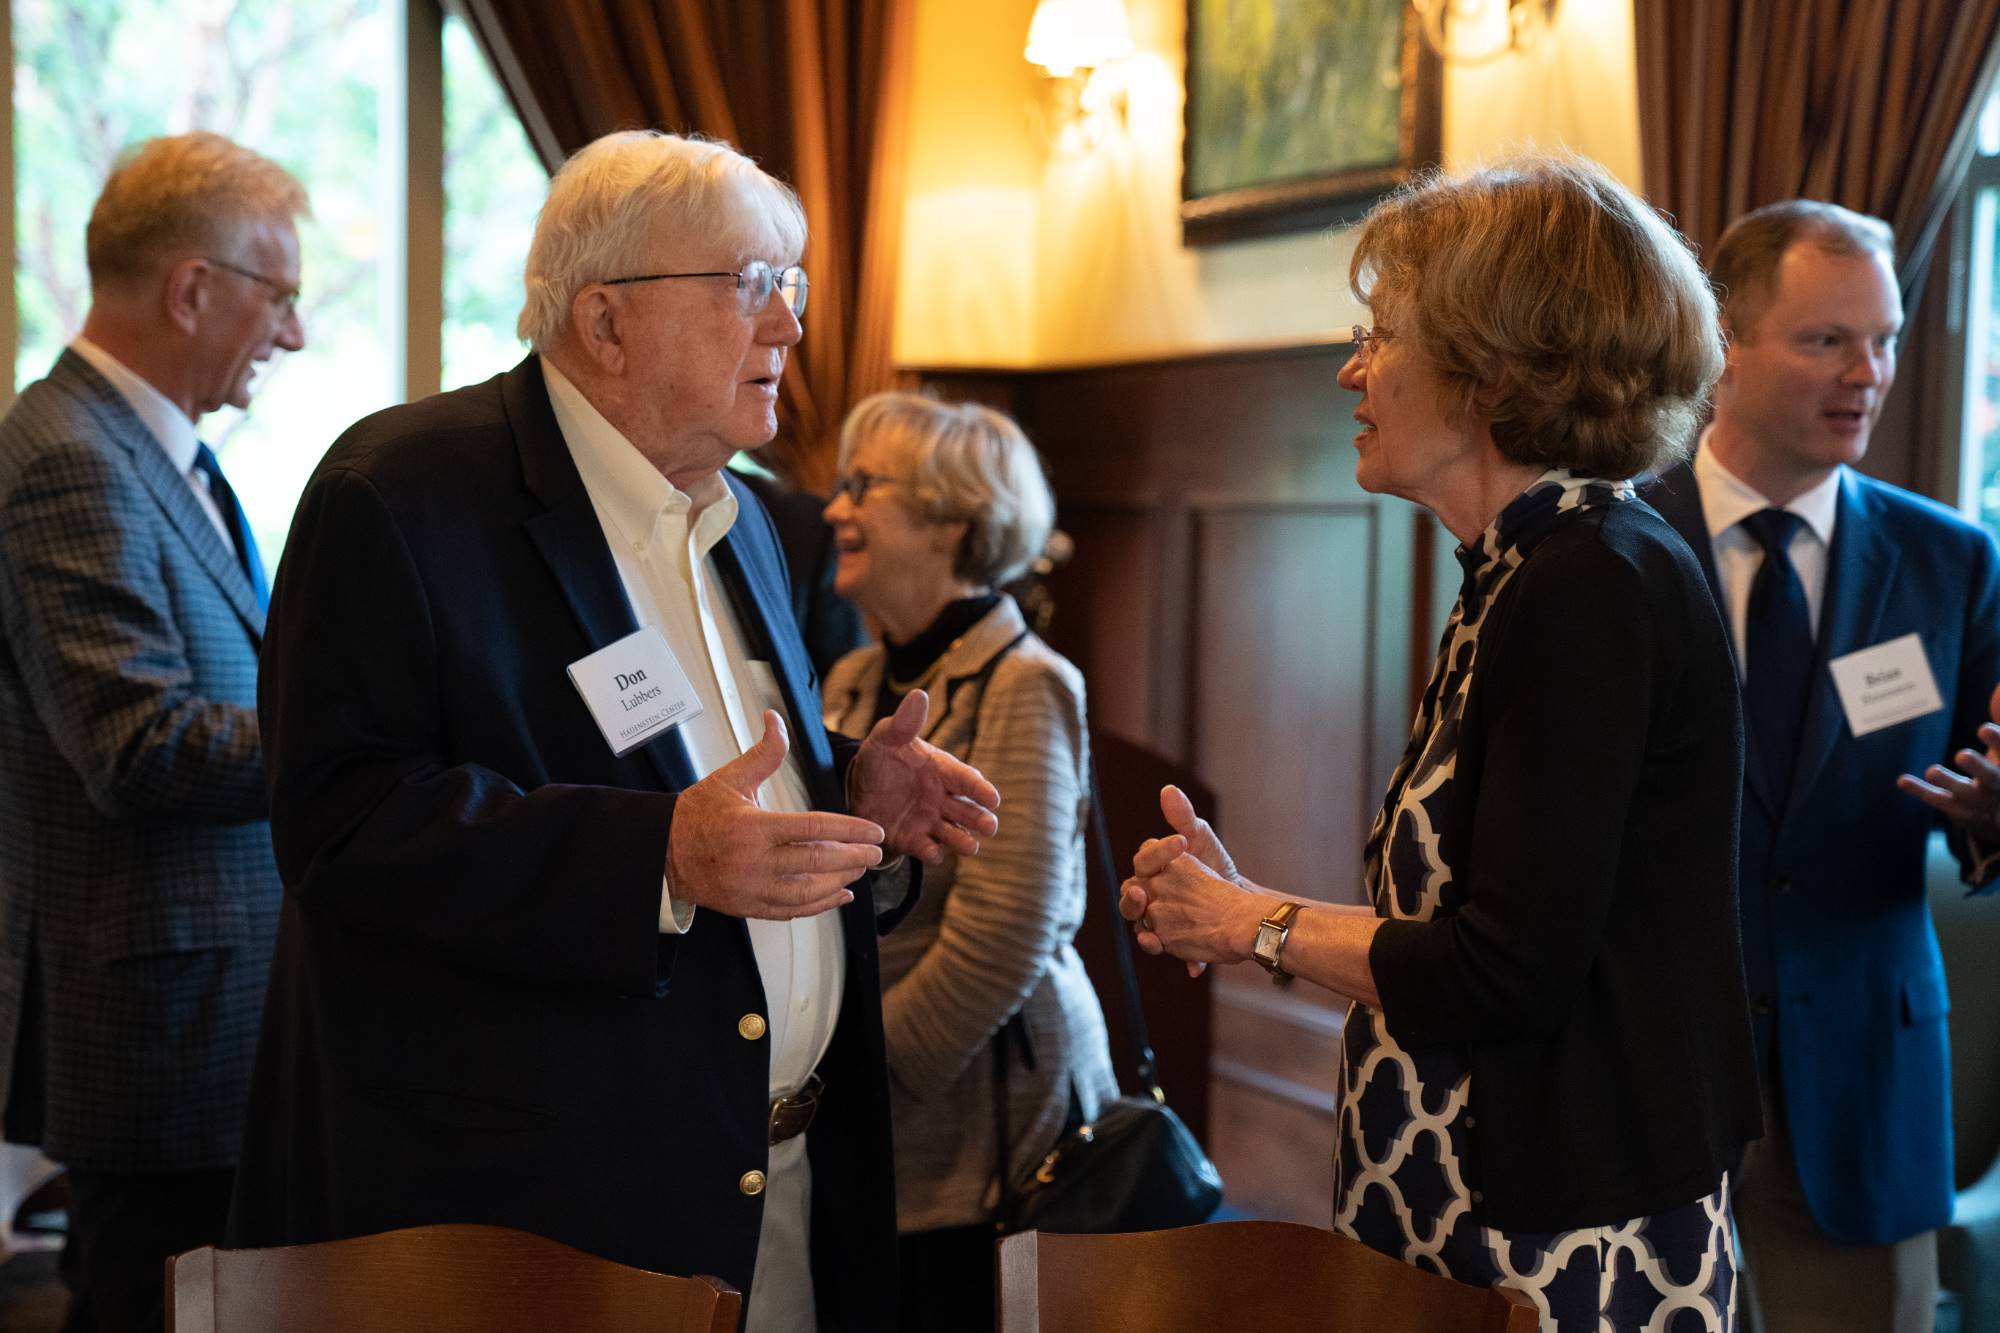 President Emeritus Don Lubbers and Lynne Olson